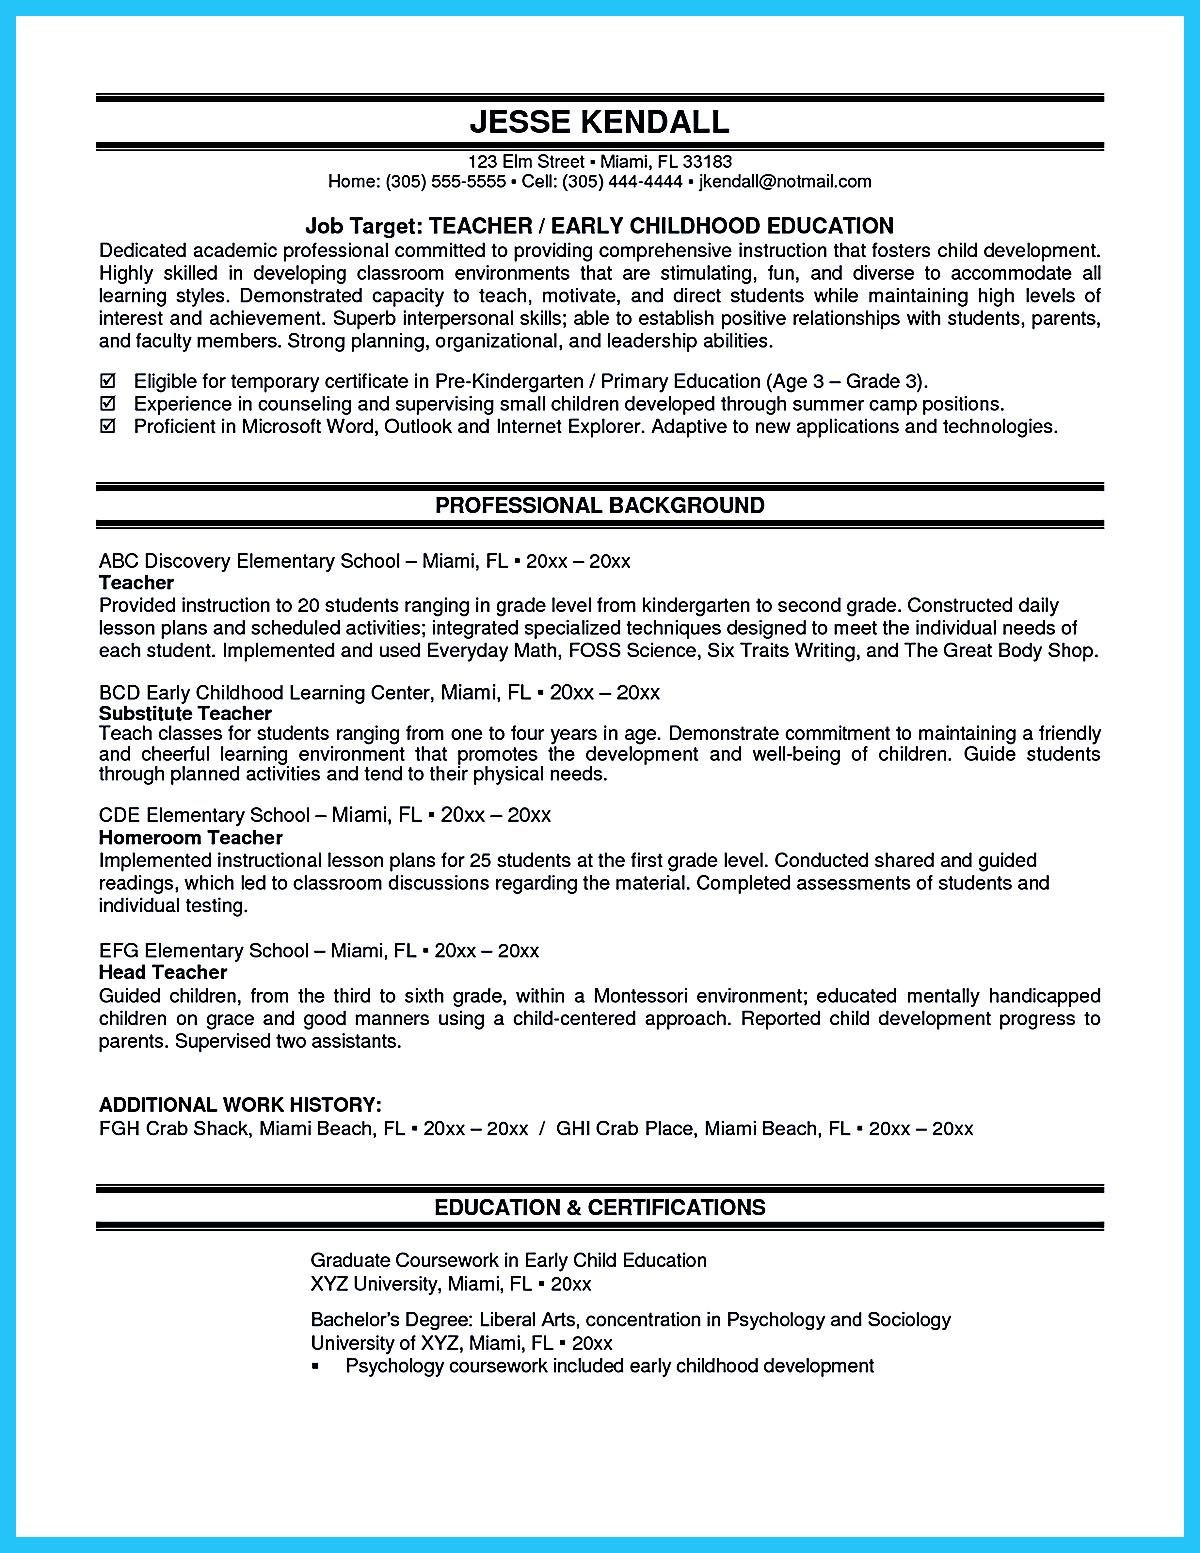 Sample Resume Acting Elementary School Principal Impressive Actor Resume Sample to Make Middle School Math Lesson …